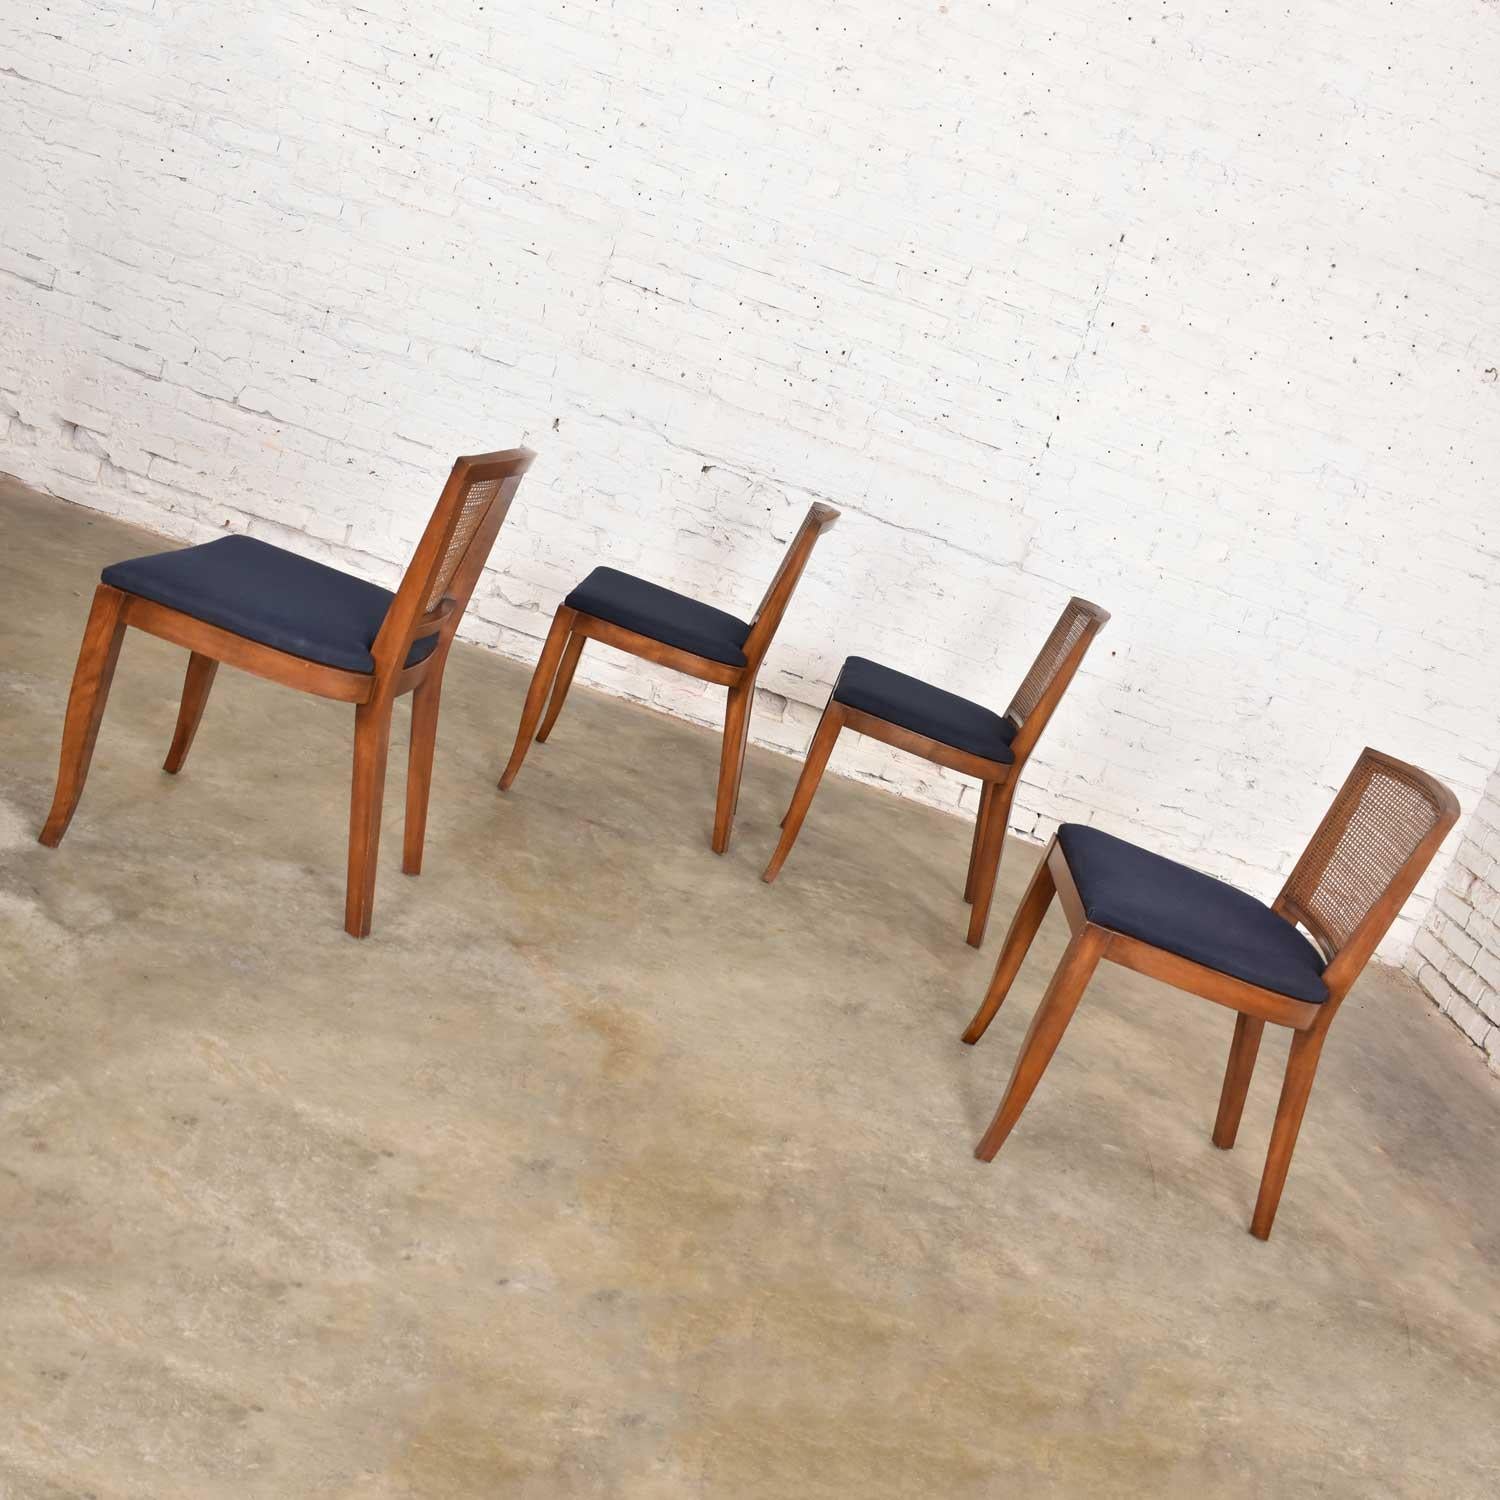 Fabric Vintage Mid-Century Modern Set of 4 Cane Back Dining Chairs Newly Upholstered